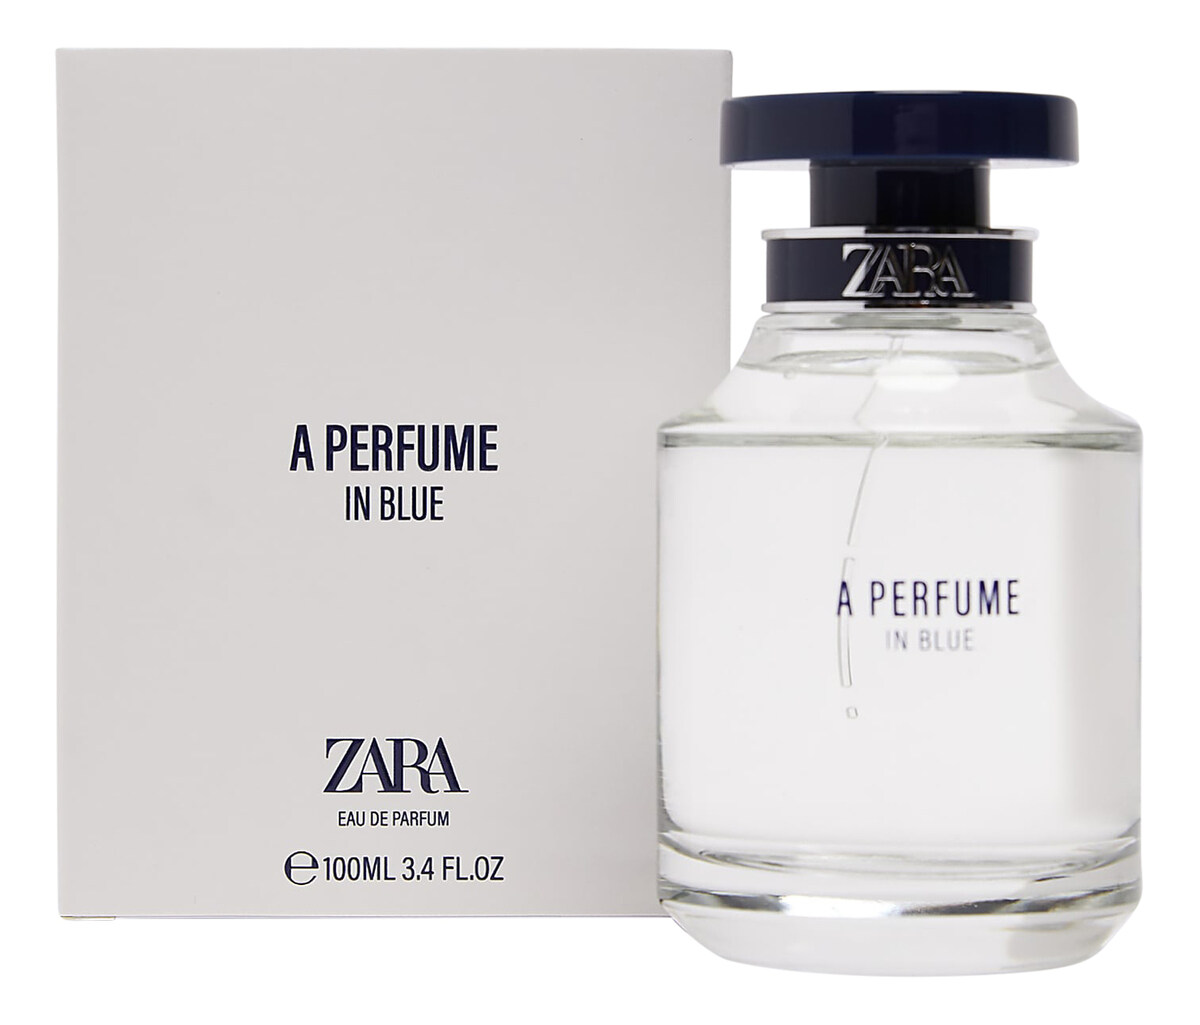 Zara - A Perfume In Blue | Reviews and 